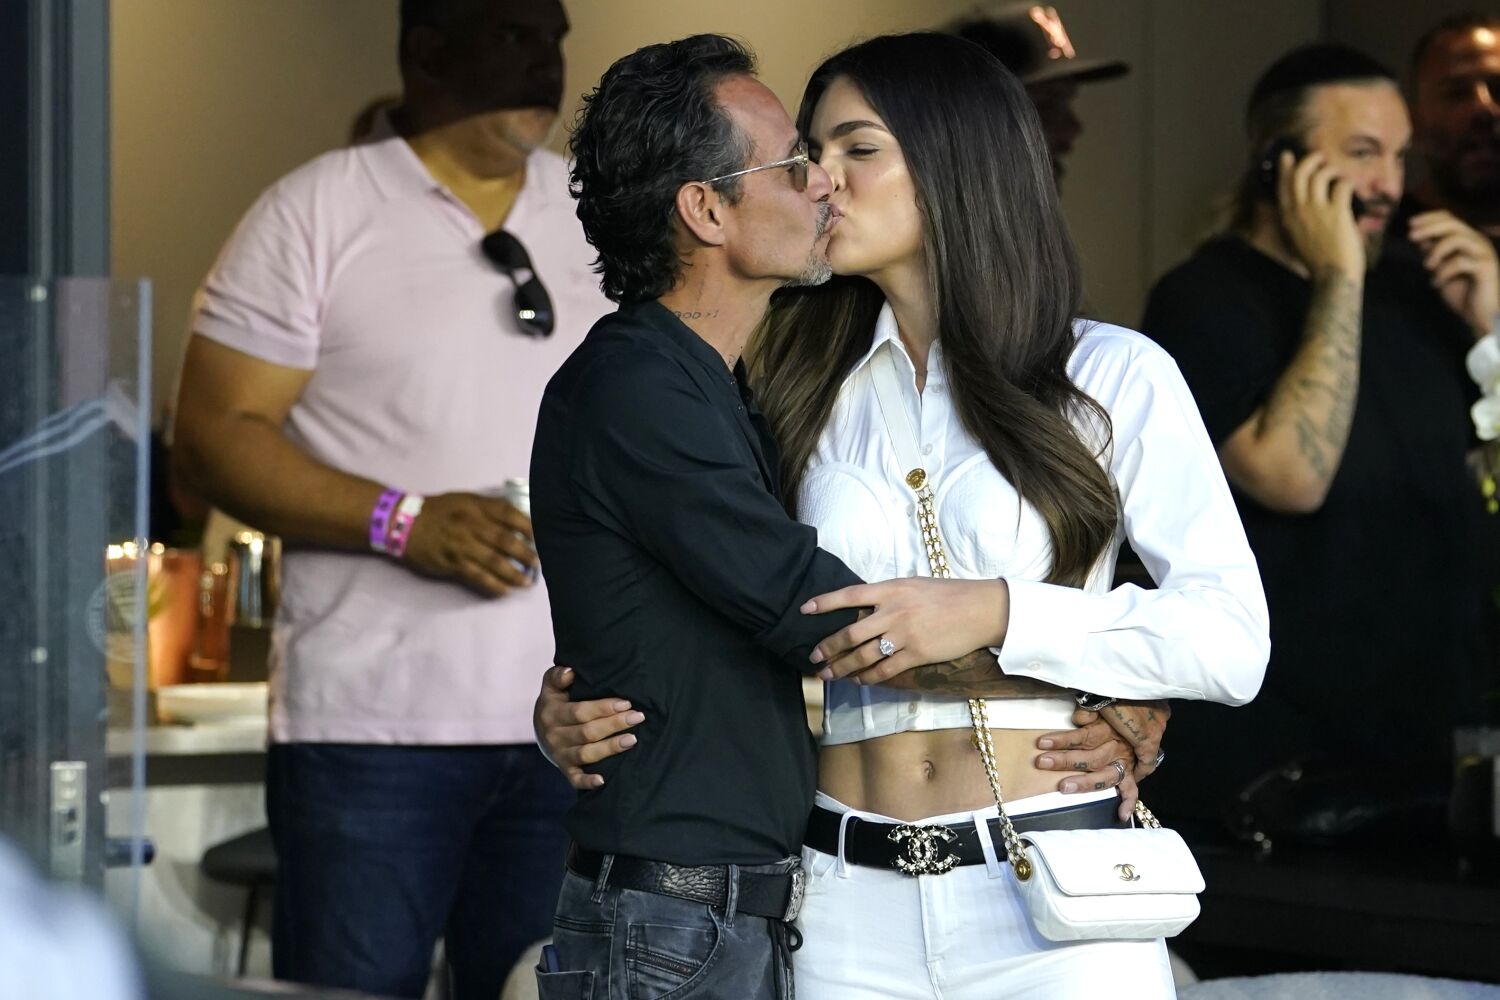 Marc Anthony's star-studded wedding to Nadia Ferreira rages well into the Miami night